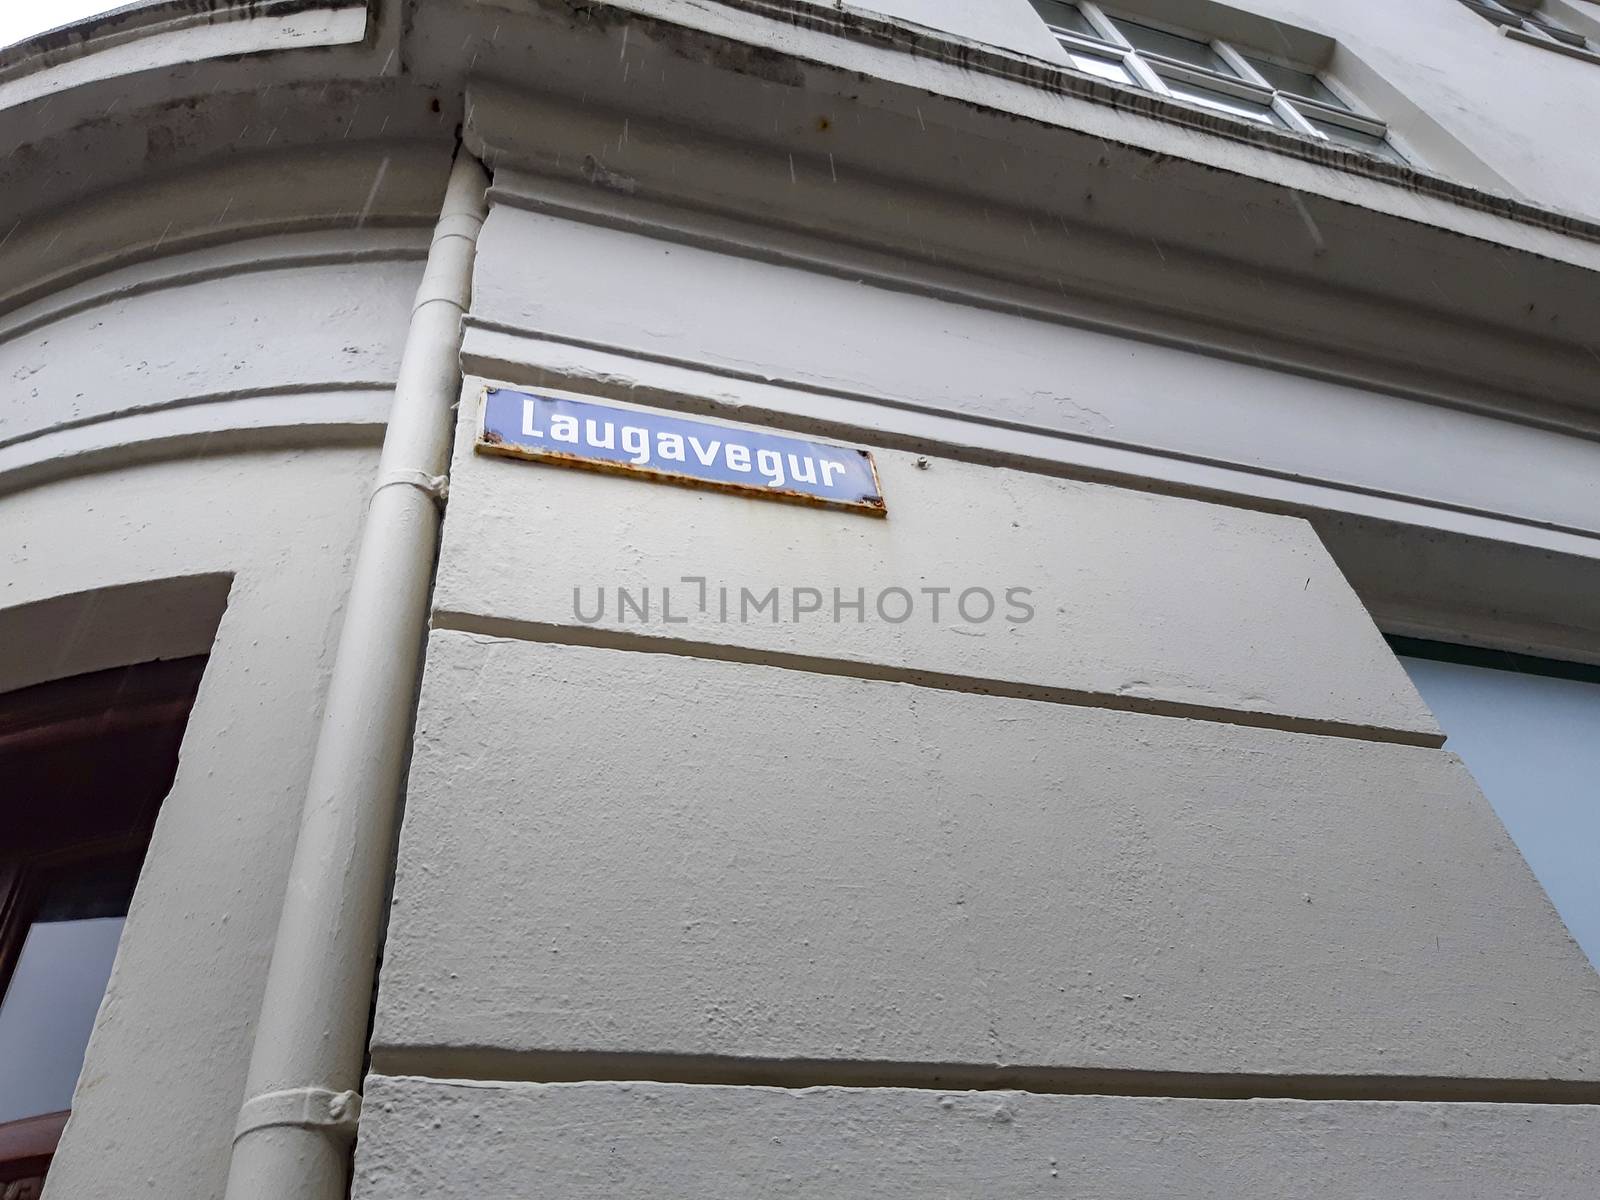 Reykjavik, Iceland, July 2019: Laugavegur street sign on the wall of a house. Famous shopping street in Reykjavik, Iceland.